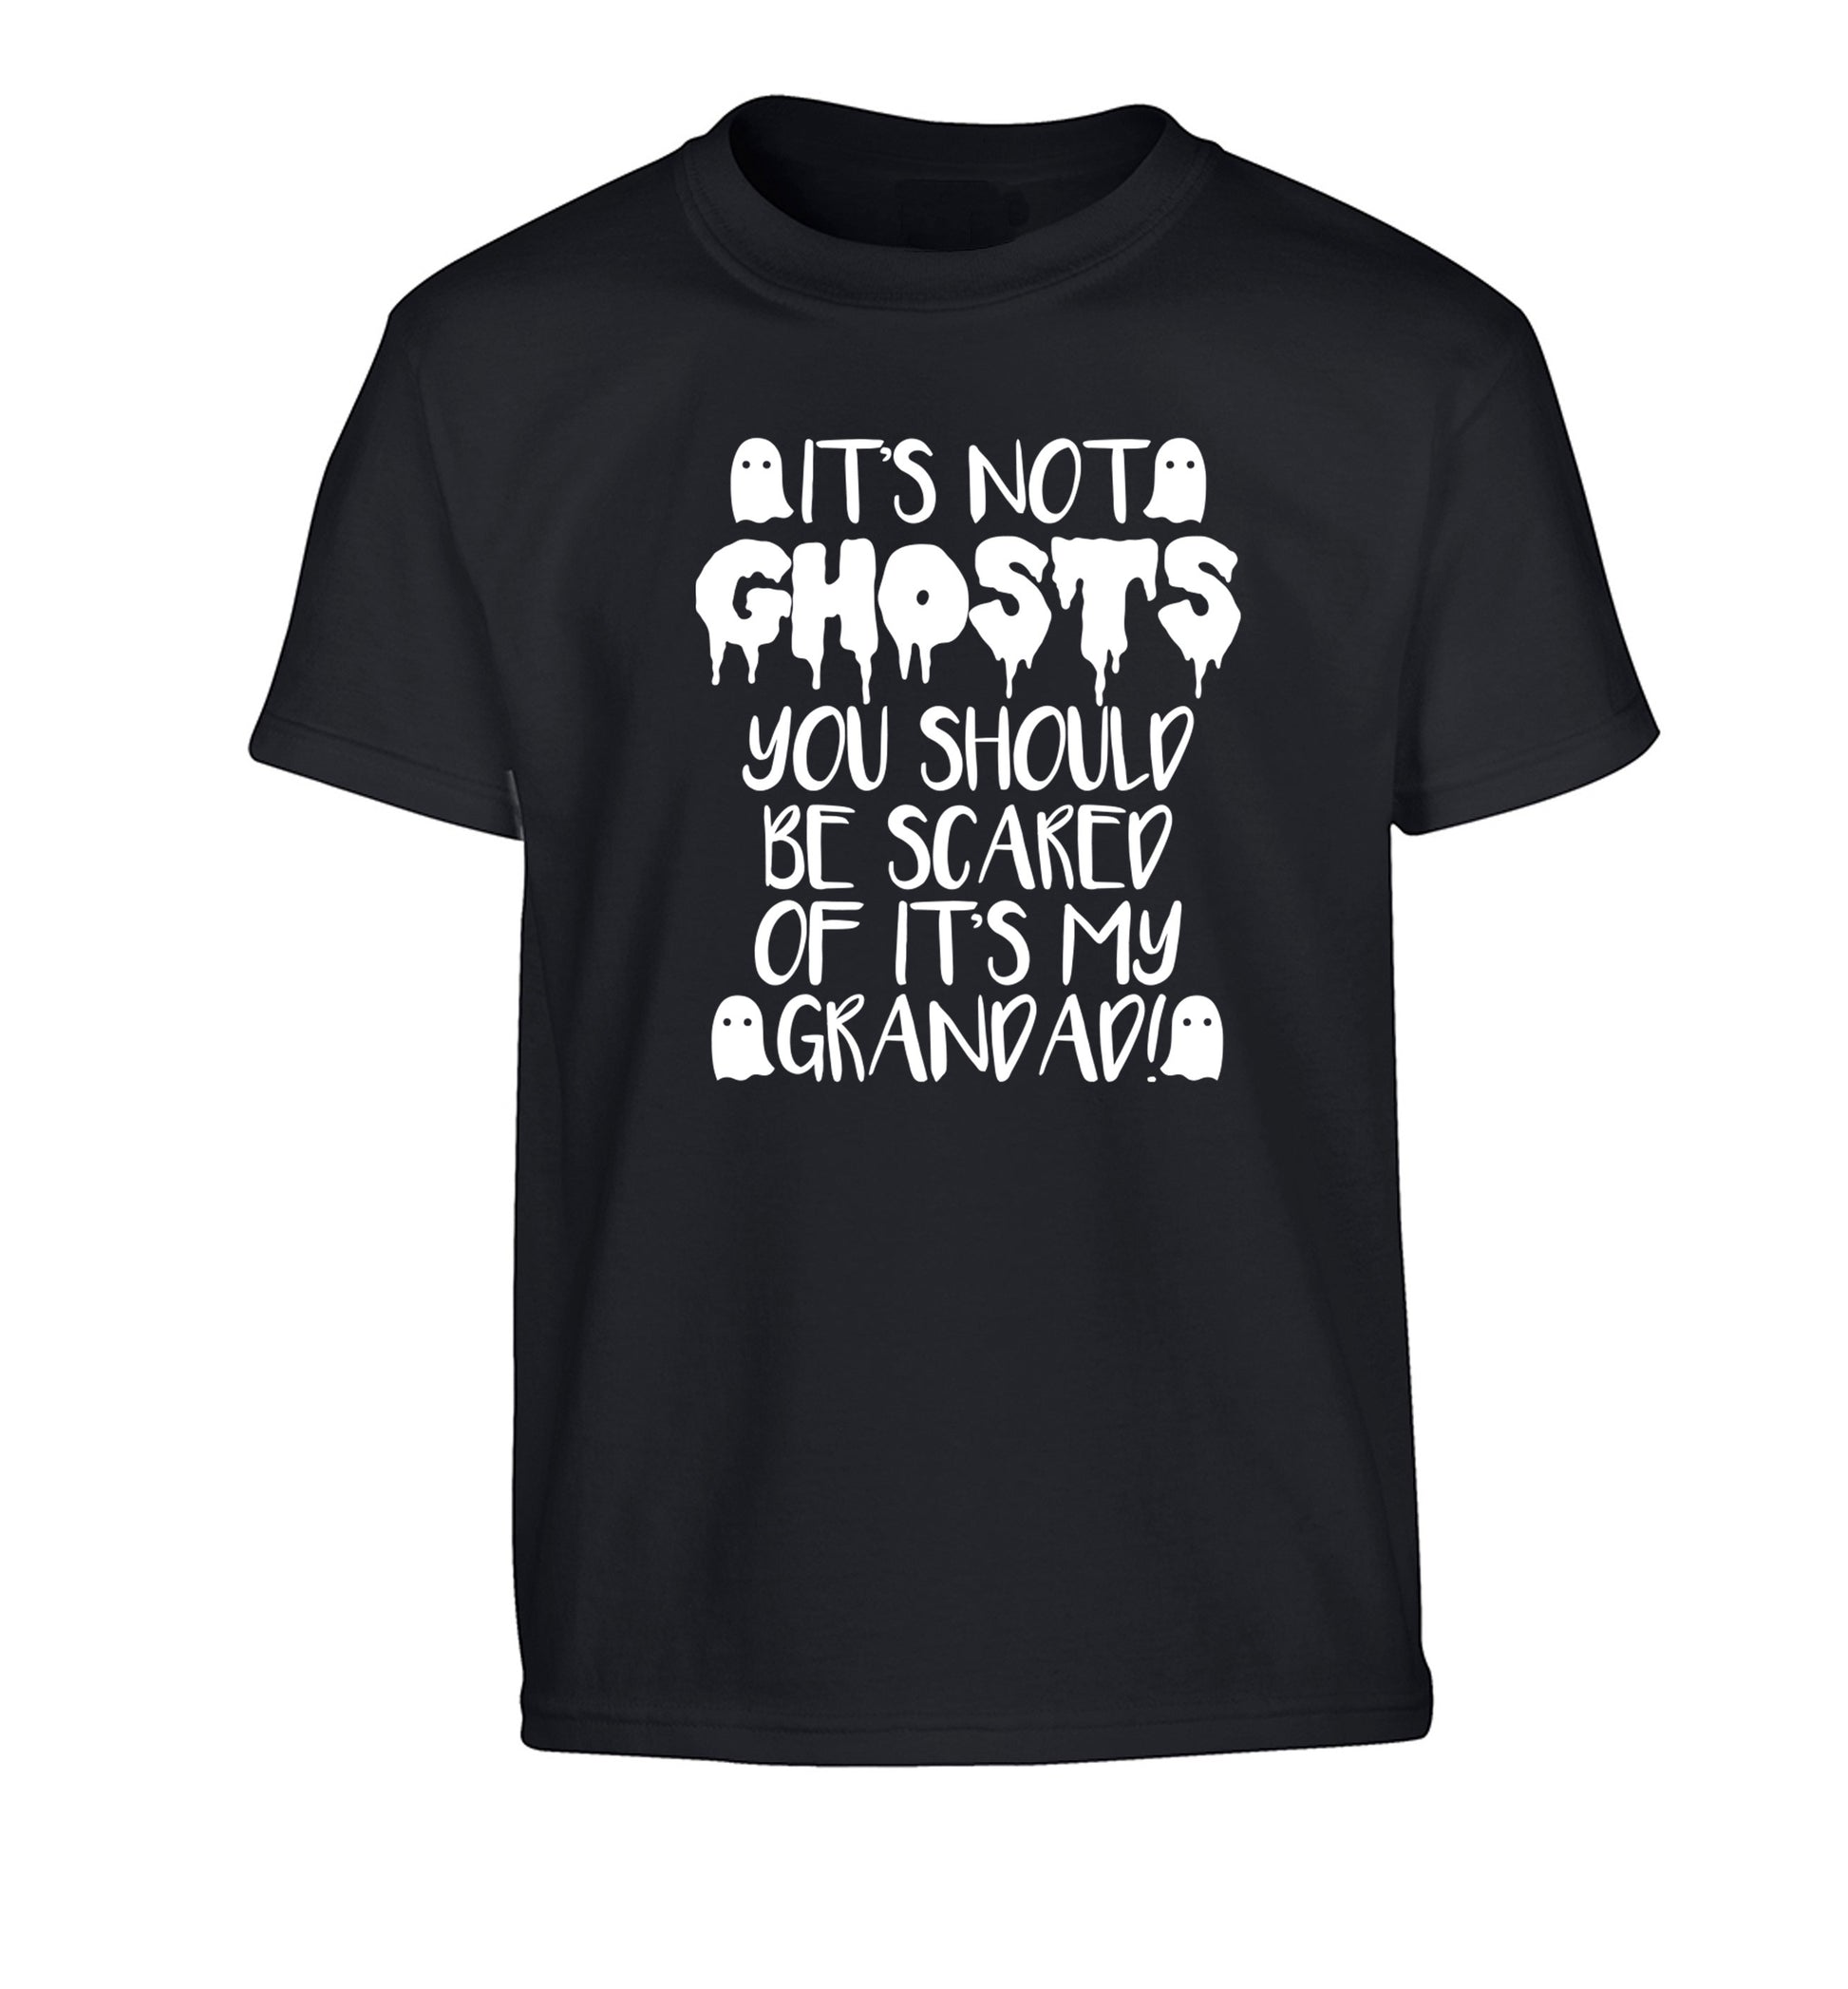 It's not ghosts you should be scared of it's my grandad! Children's black Tshirt 12-14 Years